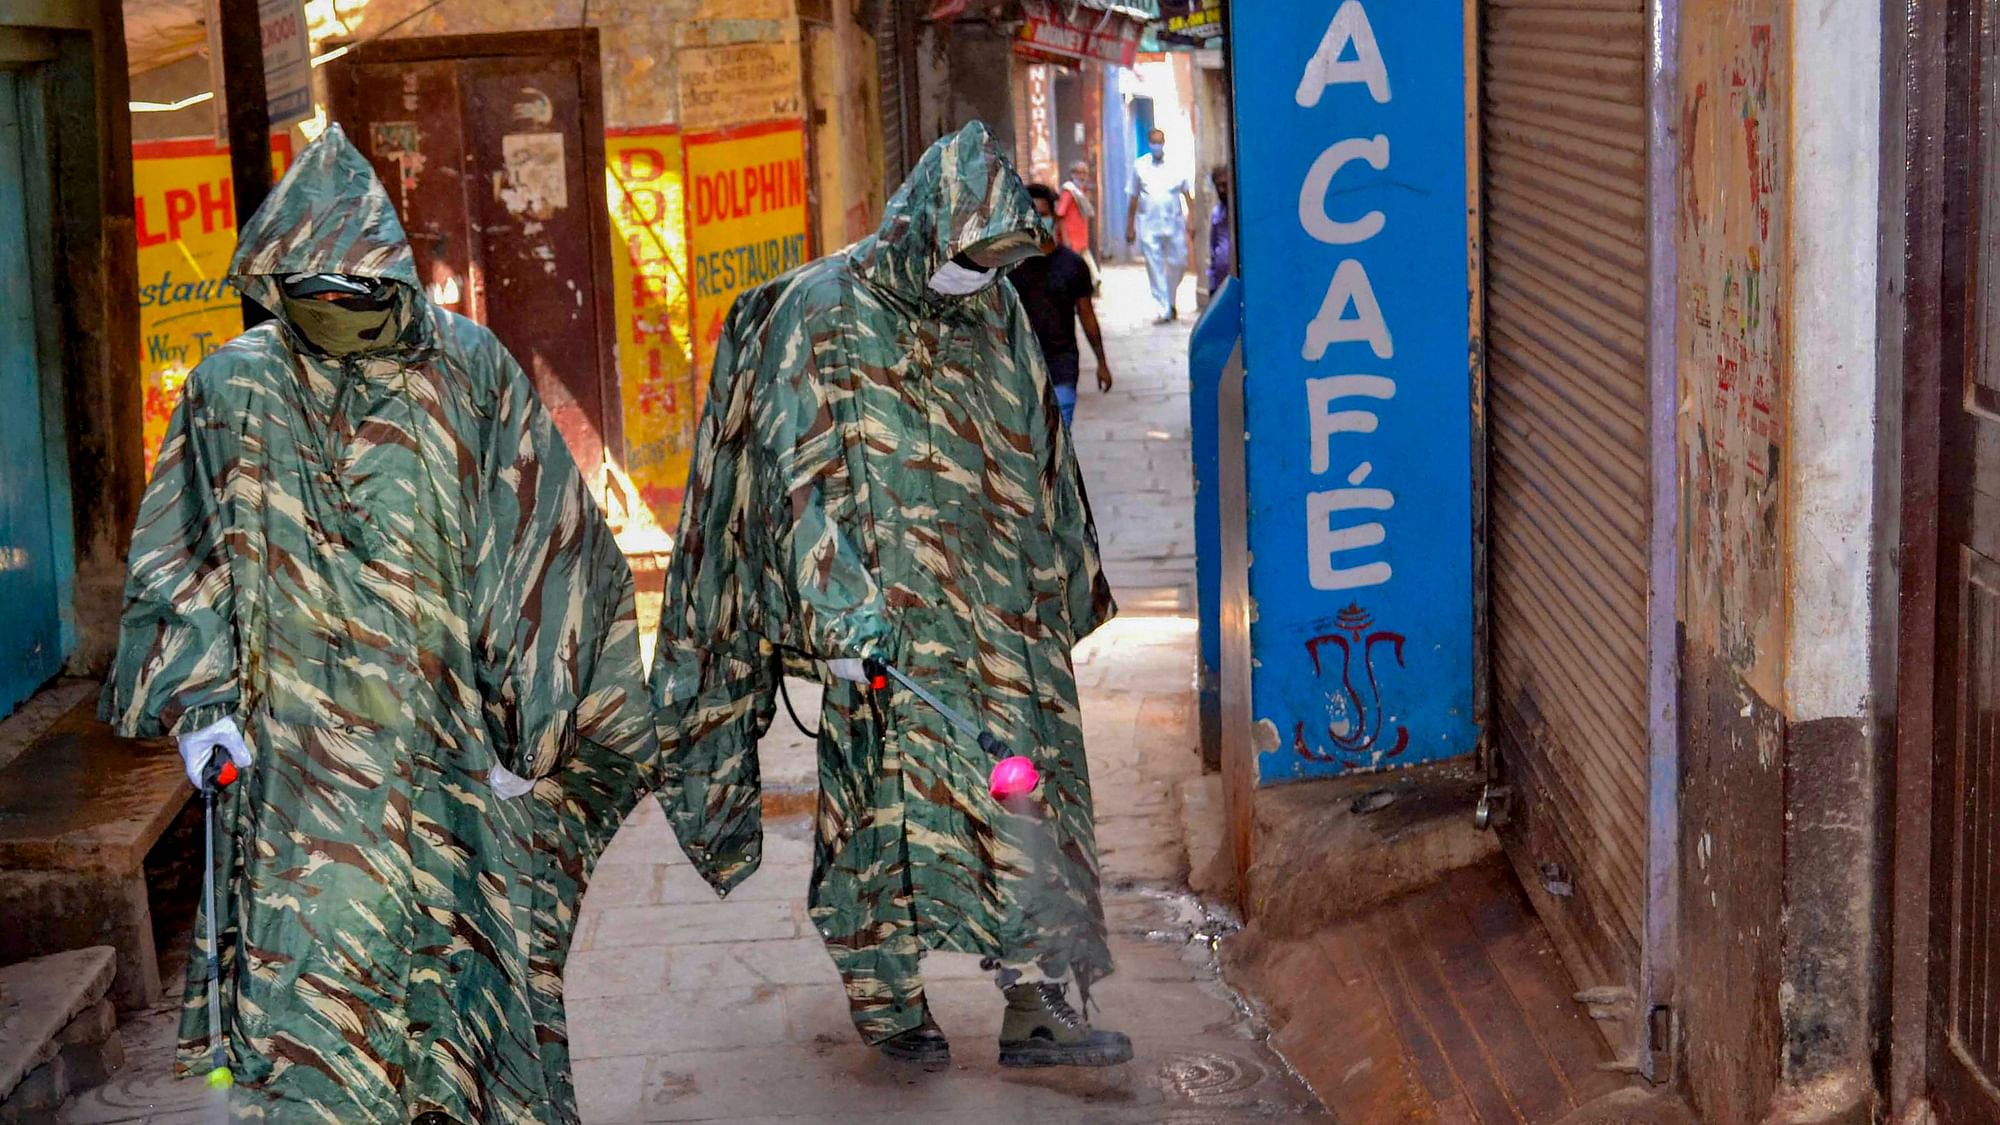 CRPF personnel wearing protective outfits sanitize a street near Dasaswamedh Ghat, Varanasi. Image used for representational purpose only.